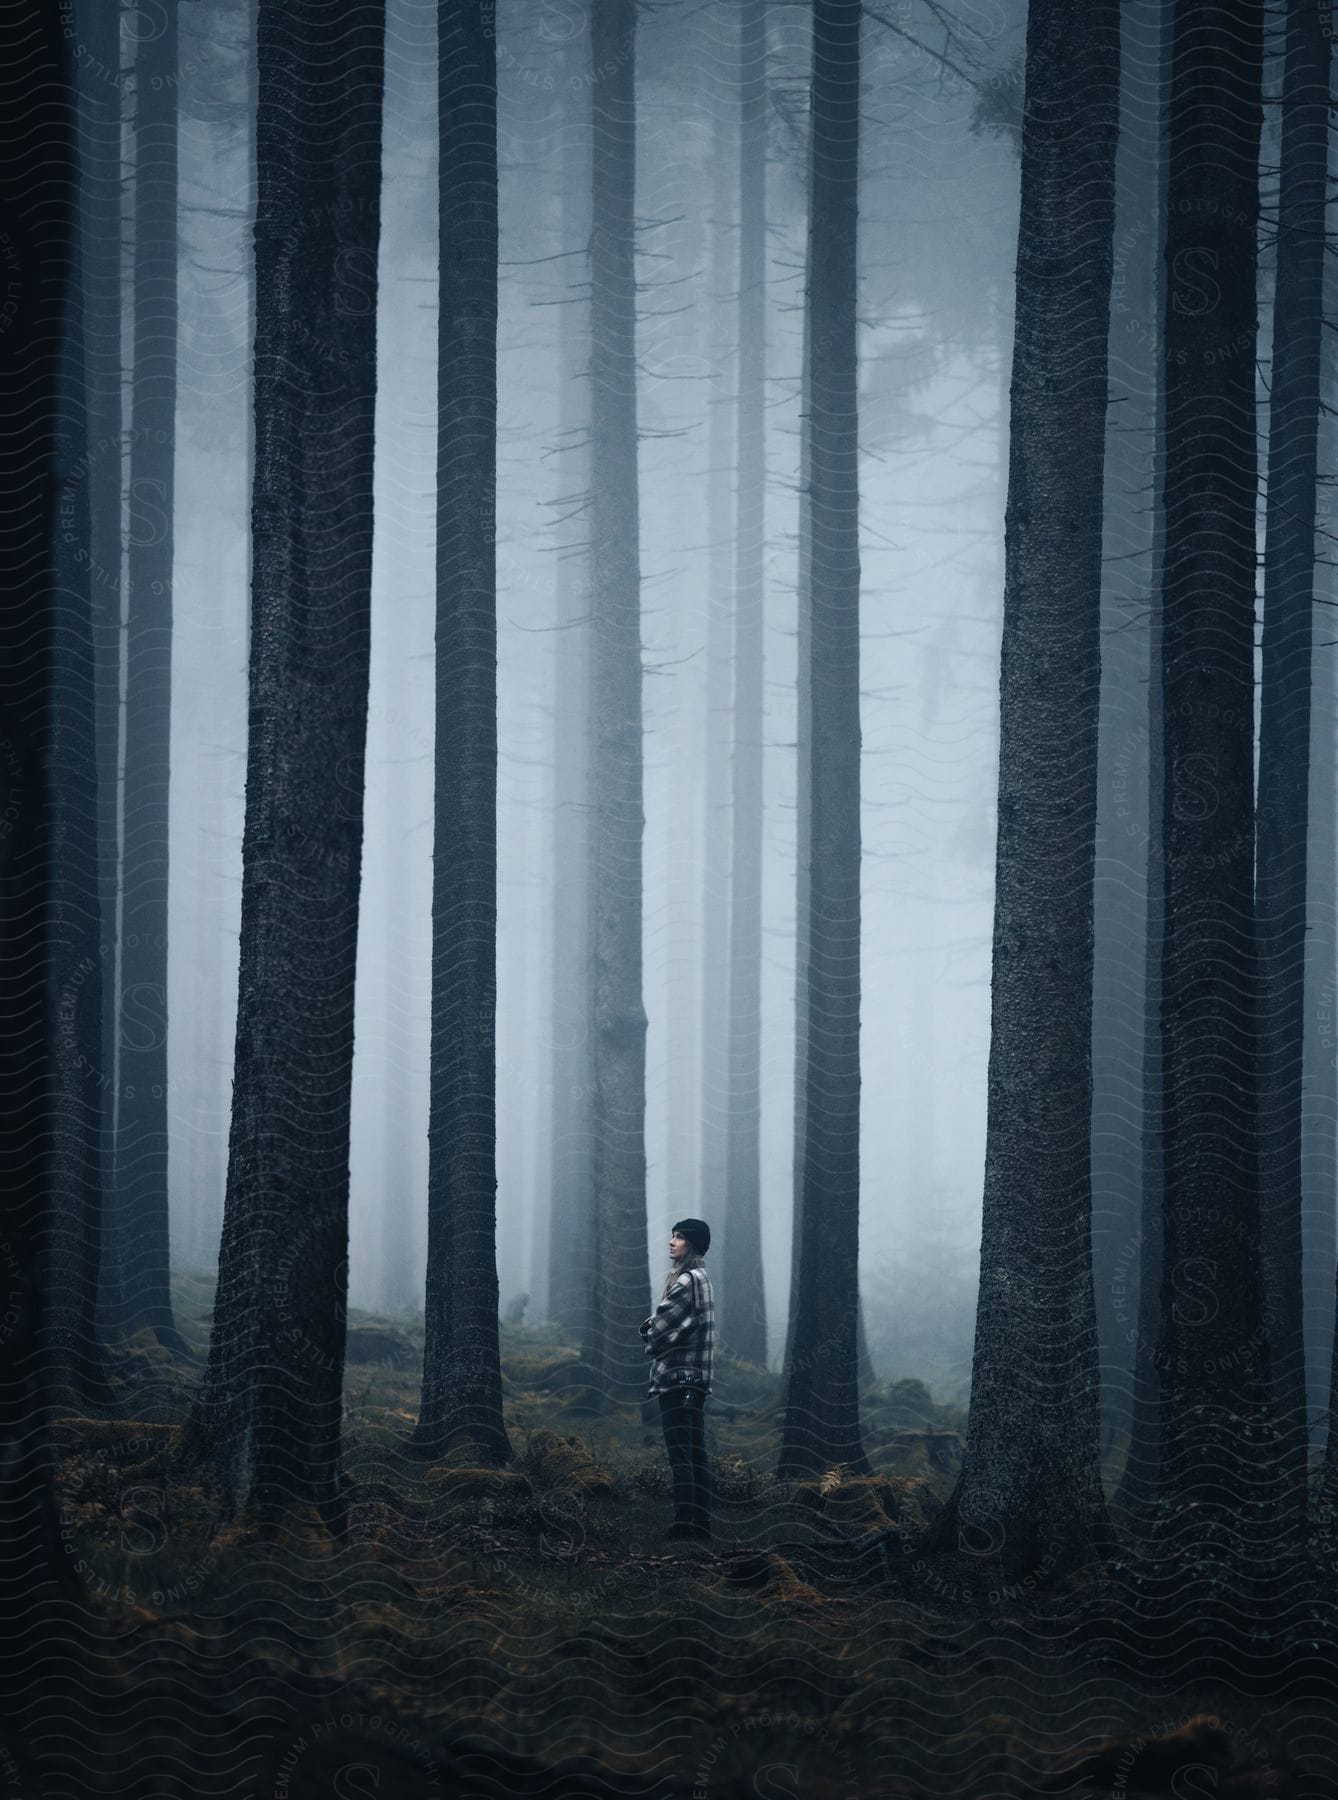 A person hiking through a foggy forest during the day